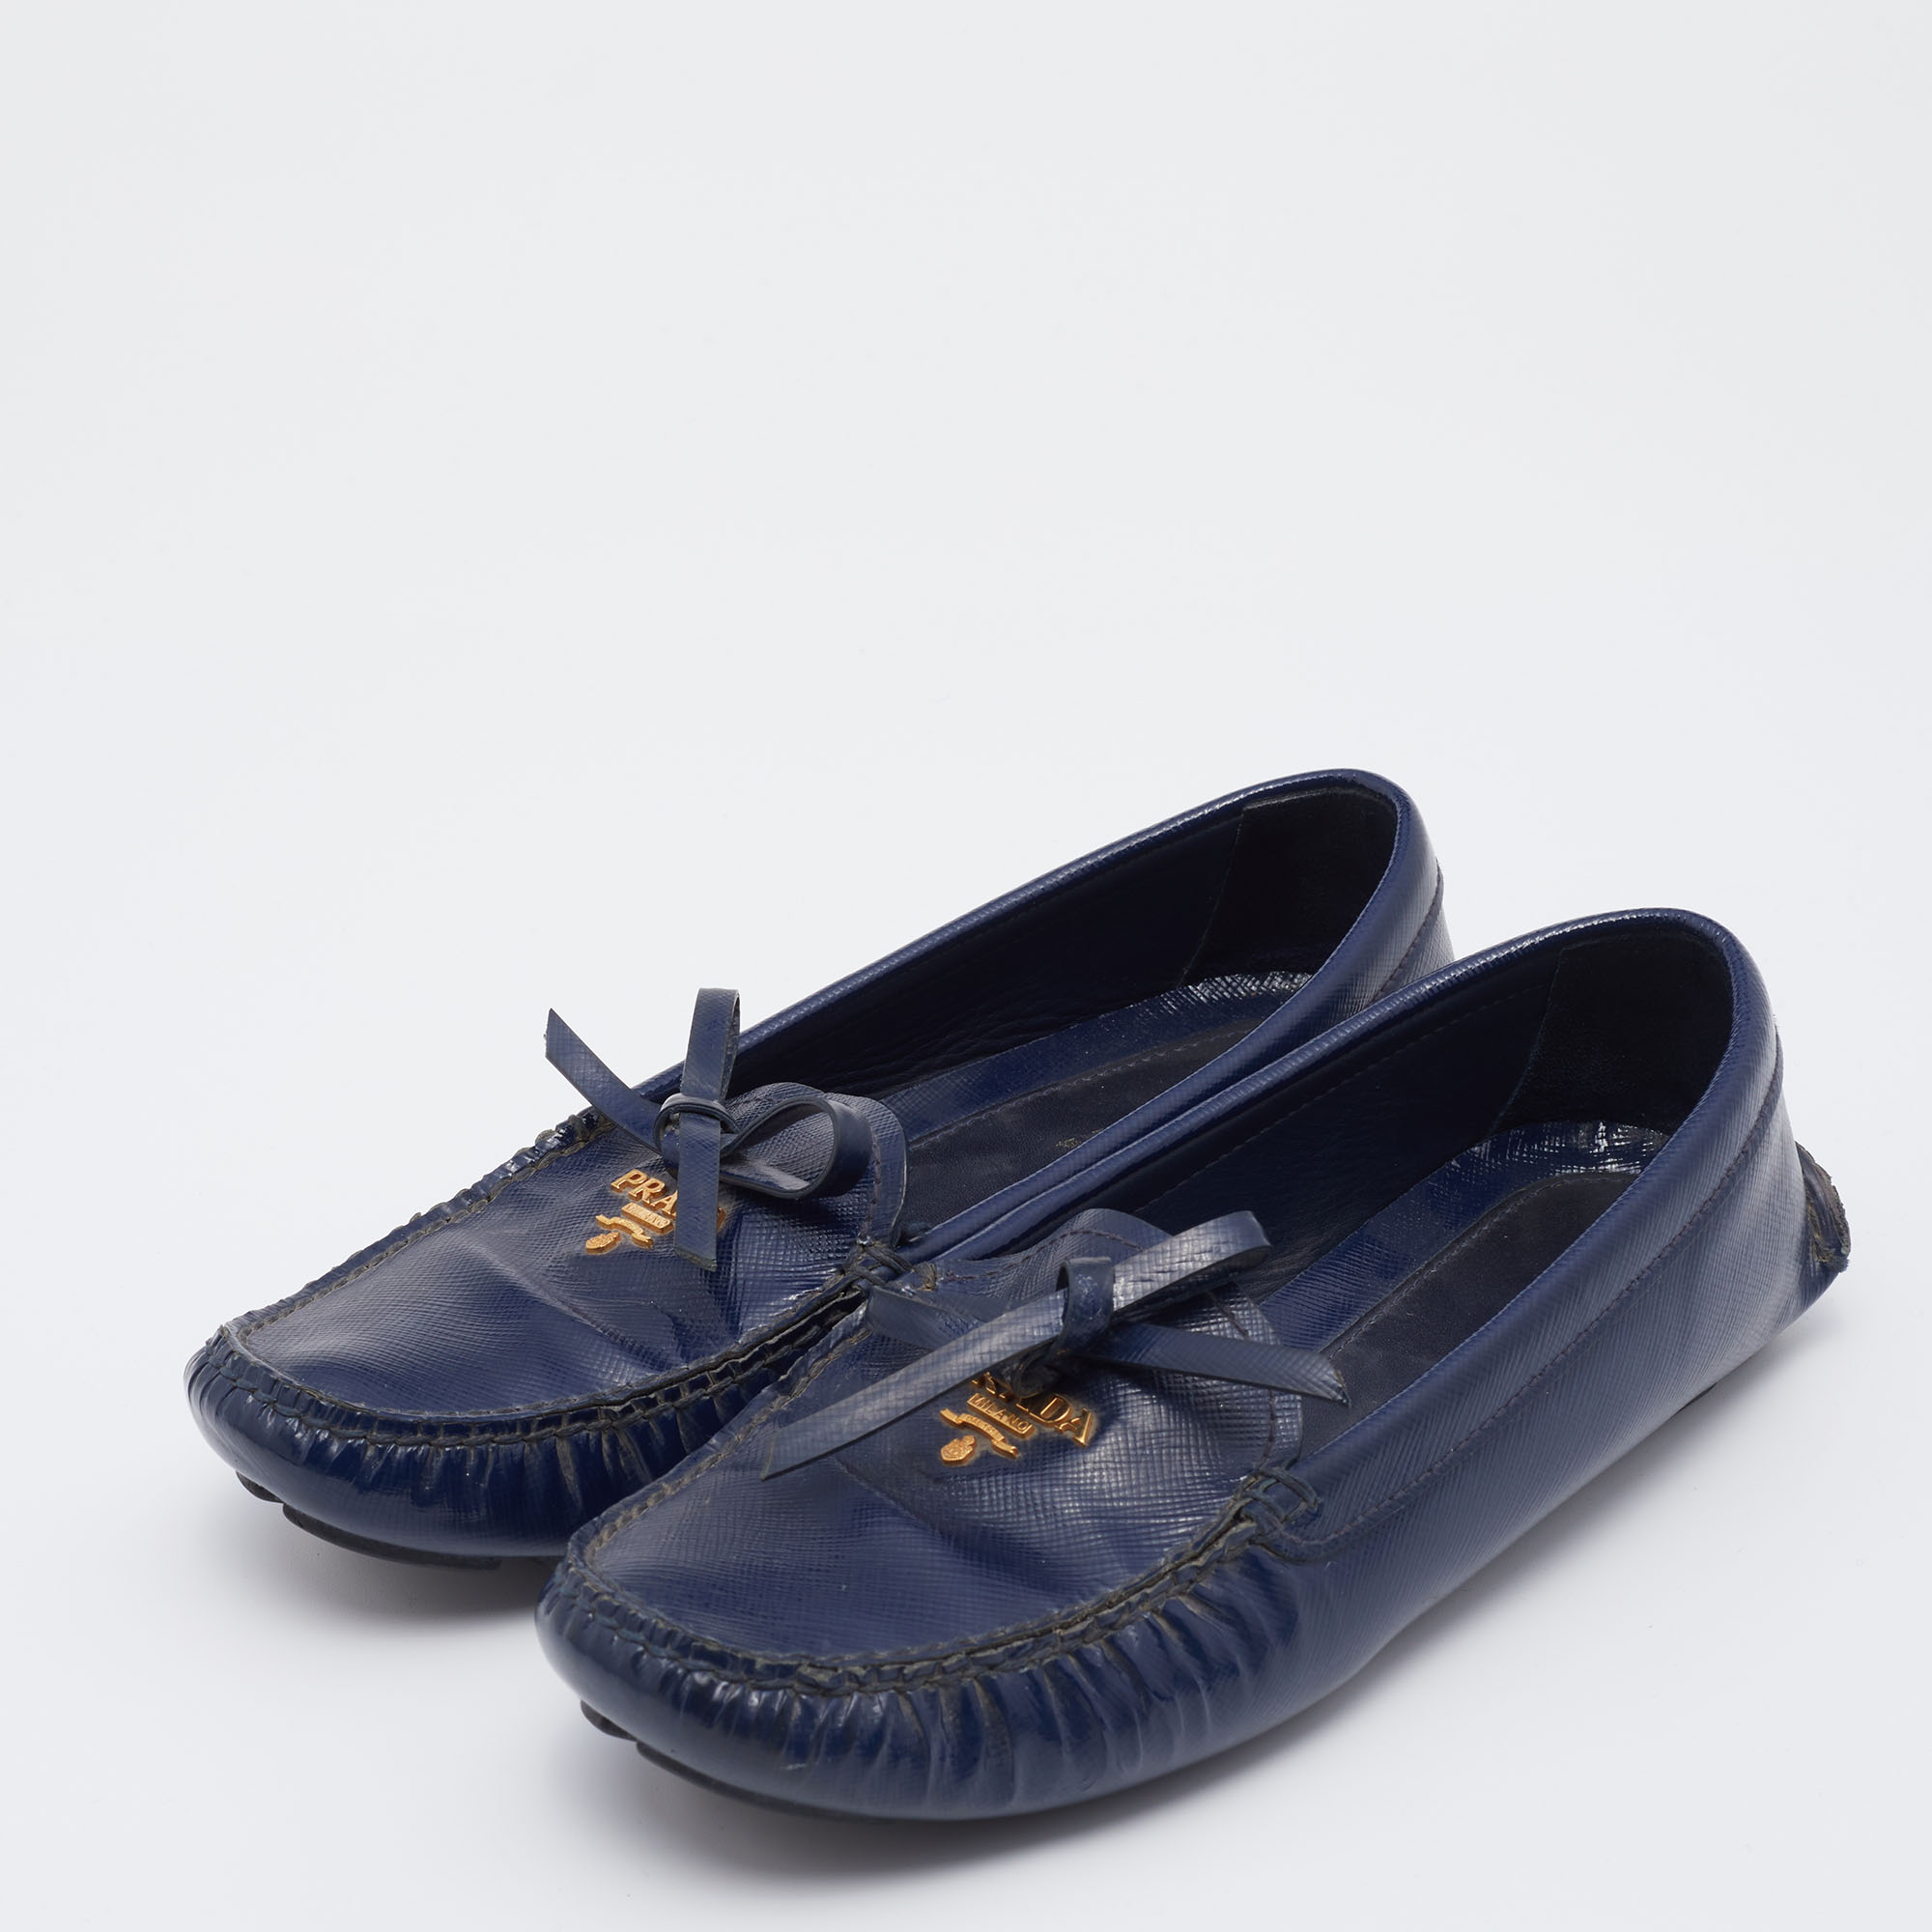 Prada Navy Blue Saffiano Patent Leather Bow Slip On Loafers Size